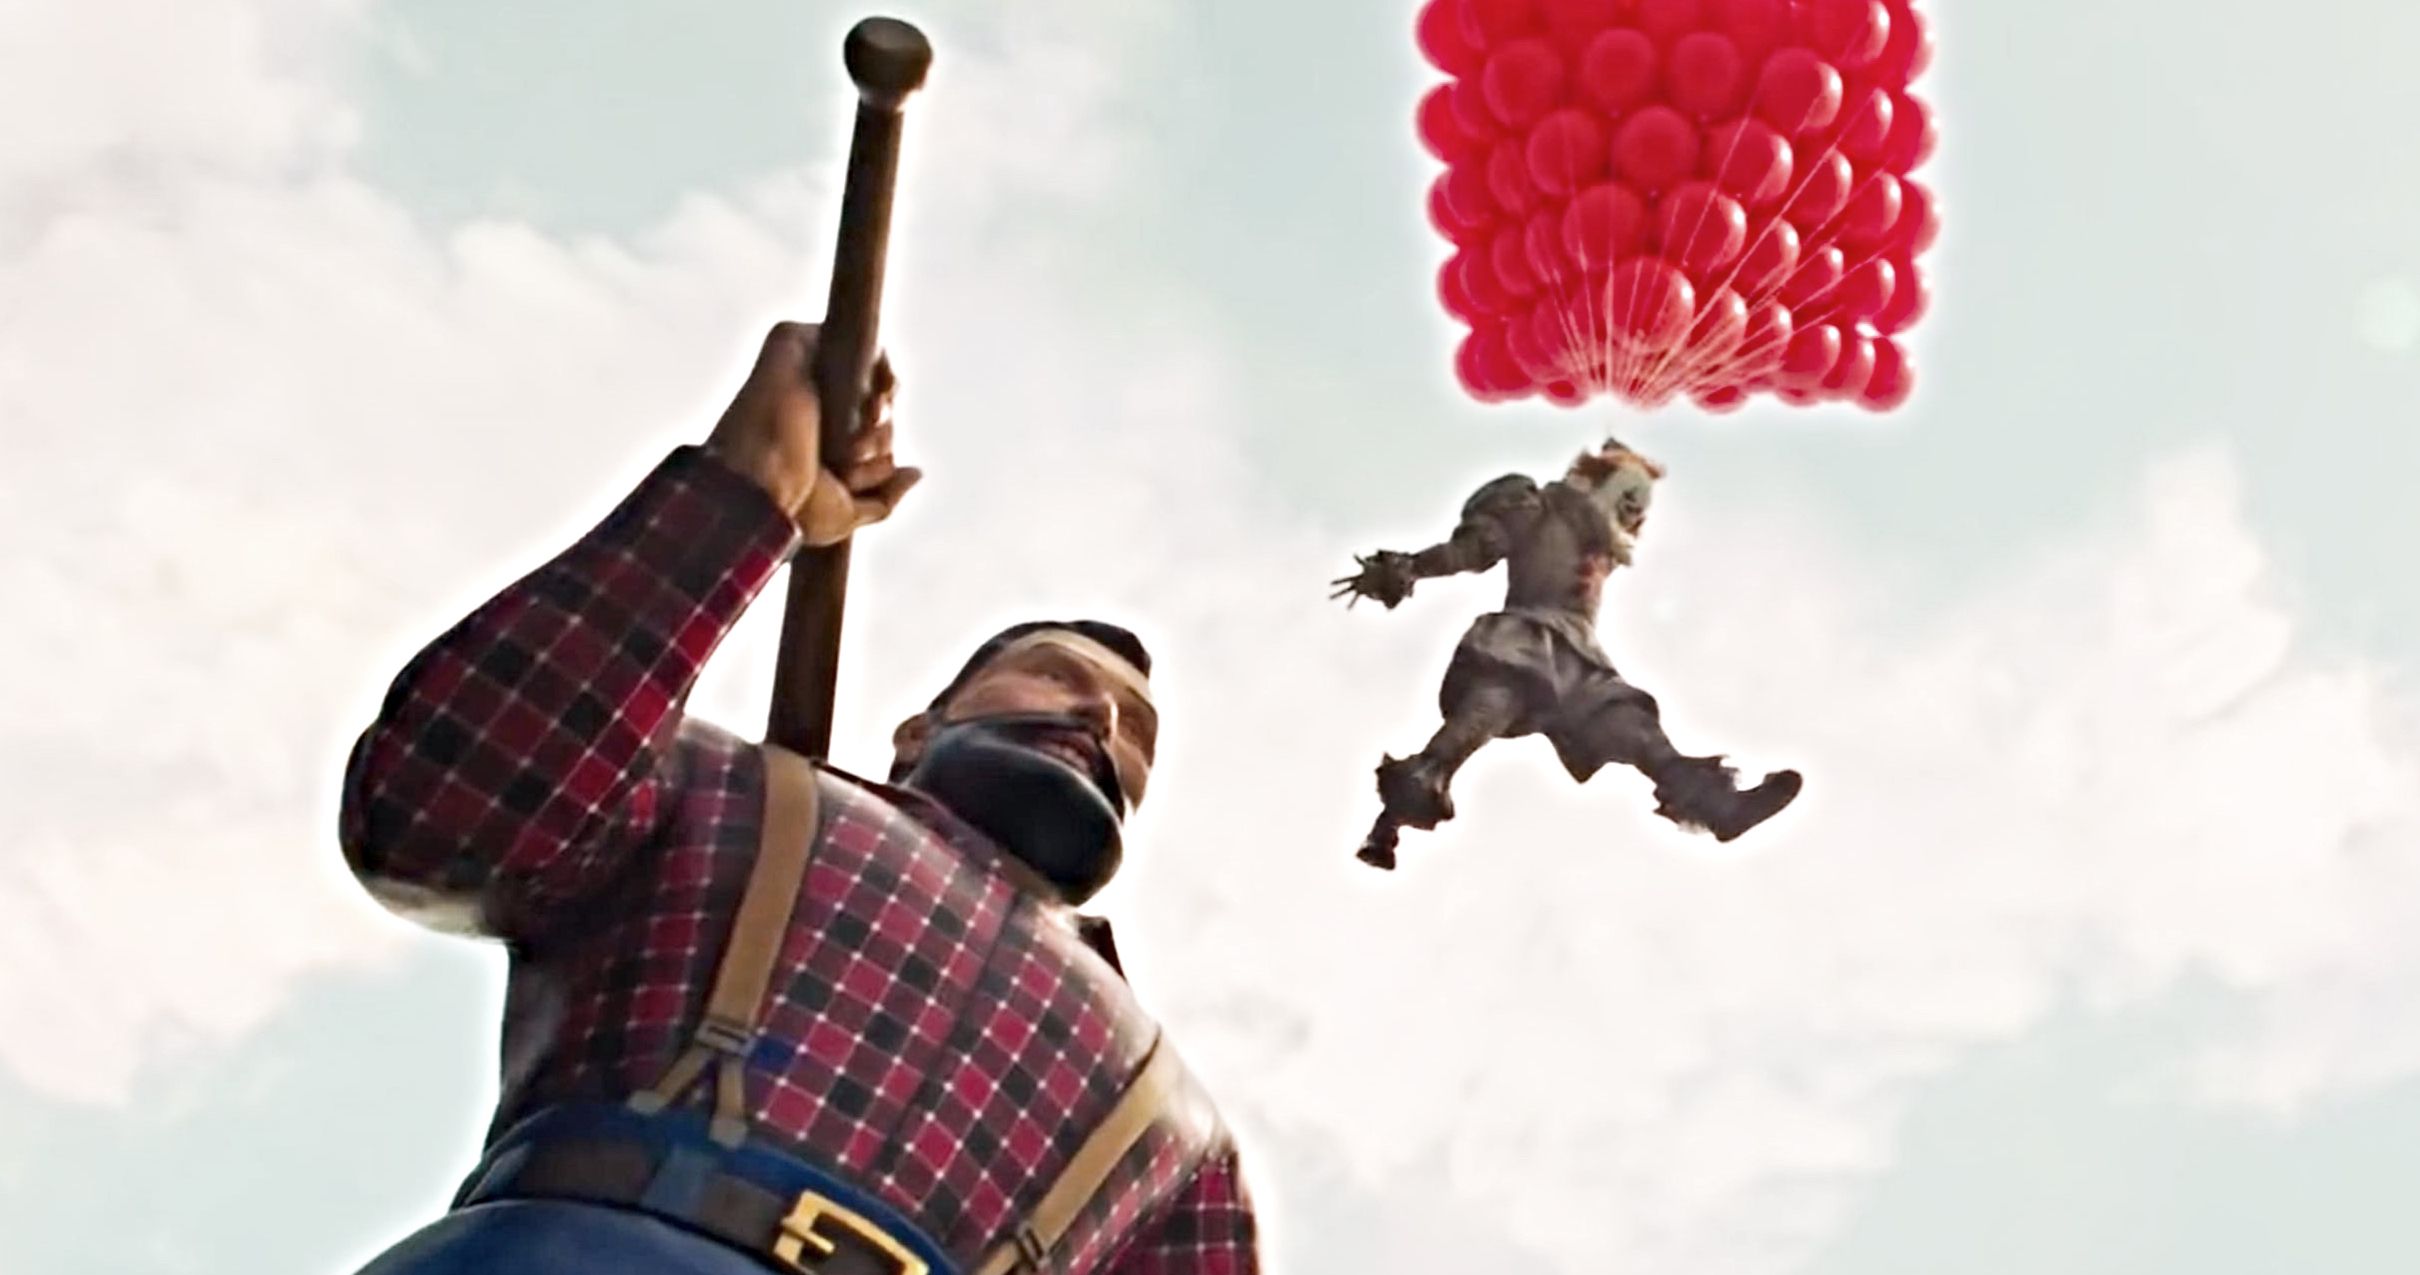 IT Chapter Two International TV Trailer Teases Iconic Paul Bunyan Attack